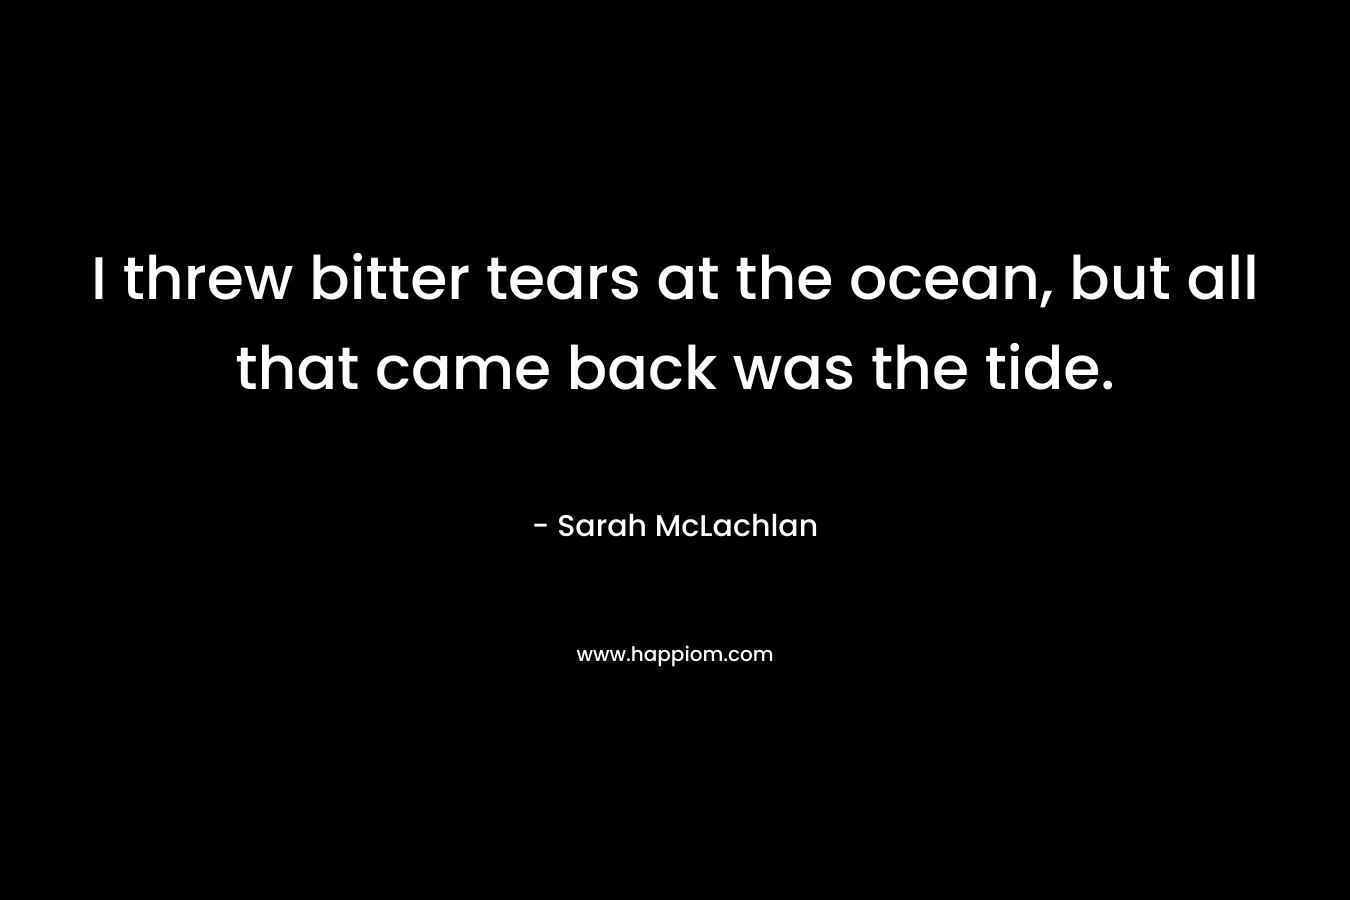 I threw bitter tears at the ocean, but all that came back was the tide. – Sarah McLachlan